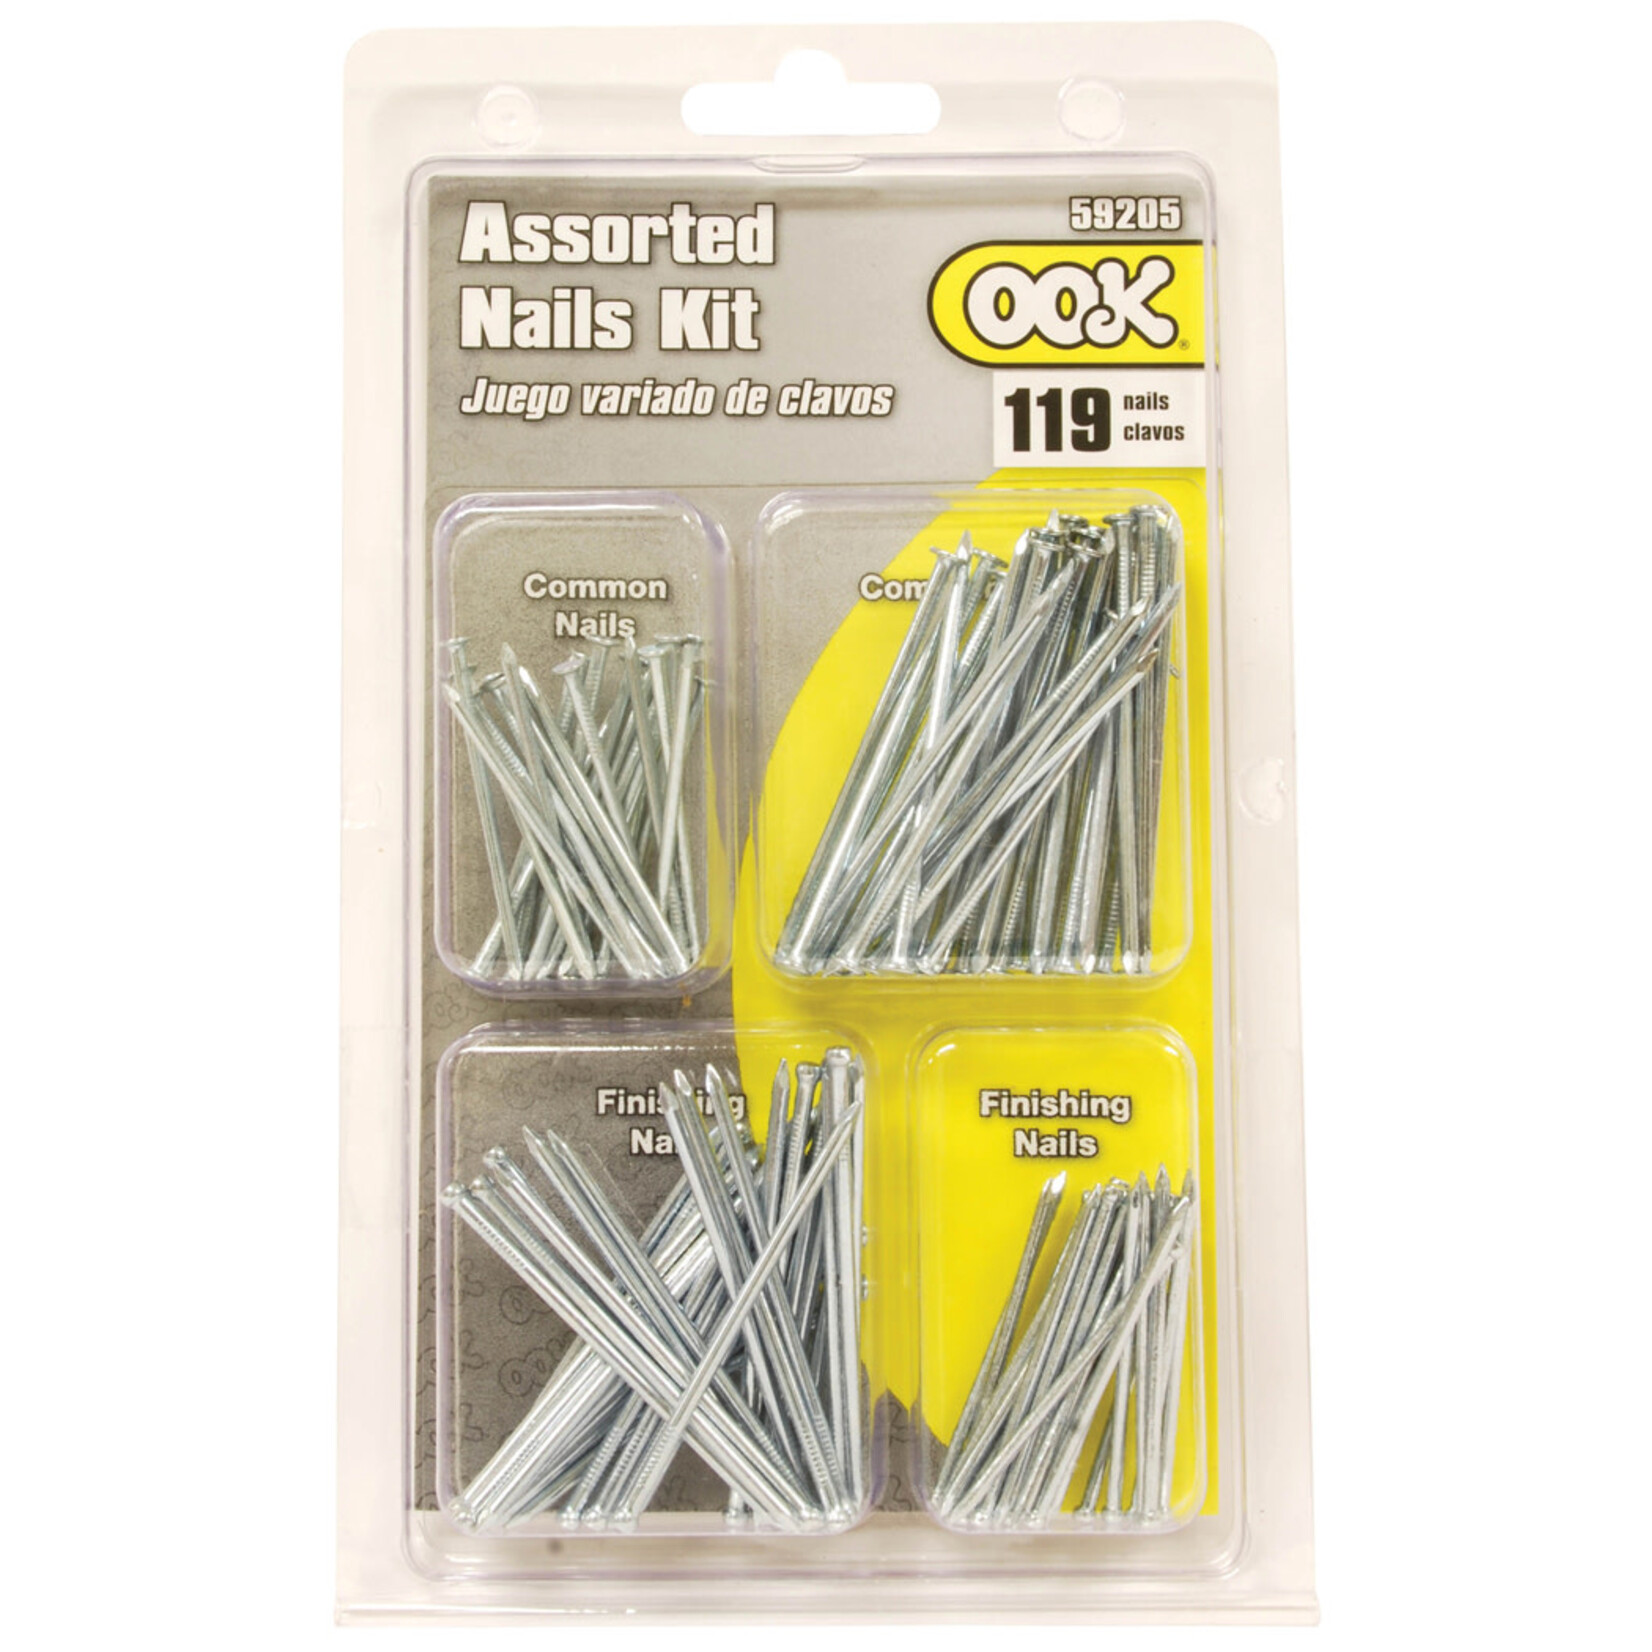 Ook Common Nails Kit Assorted Cd